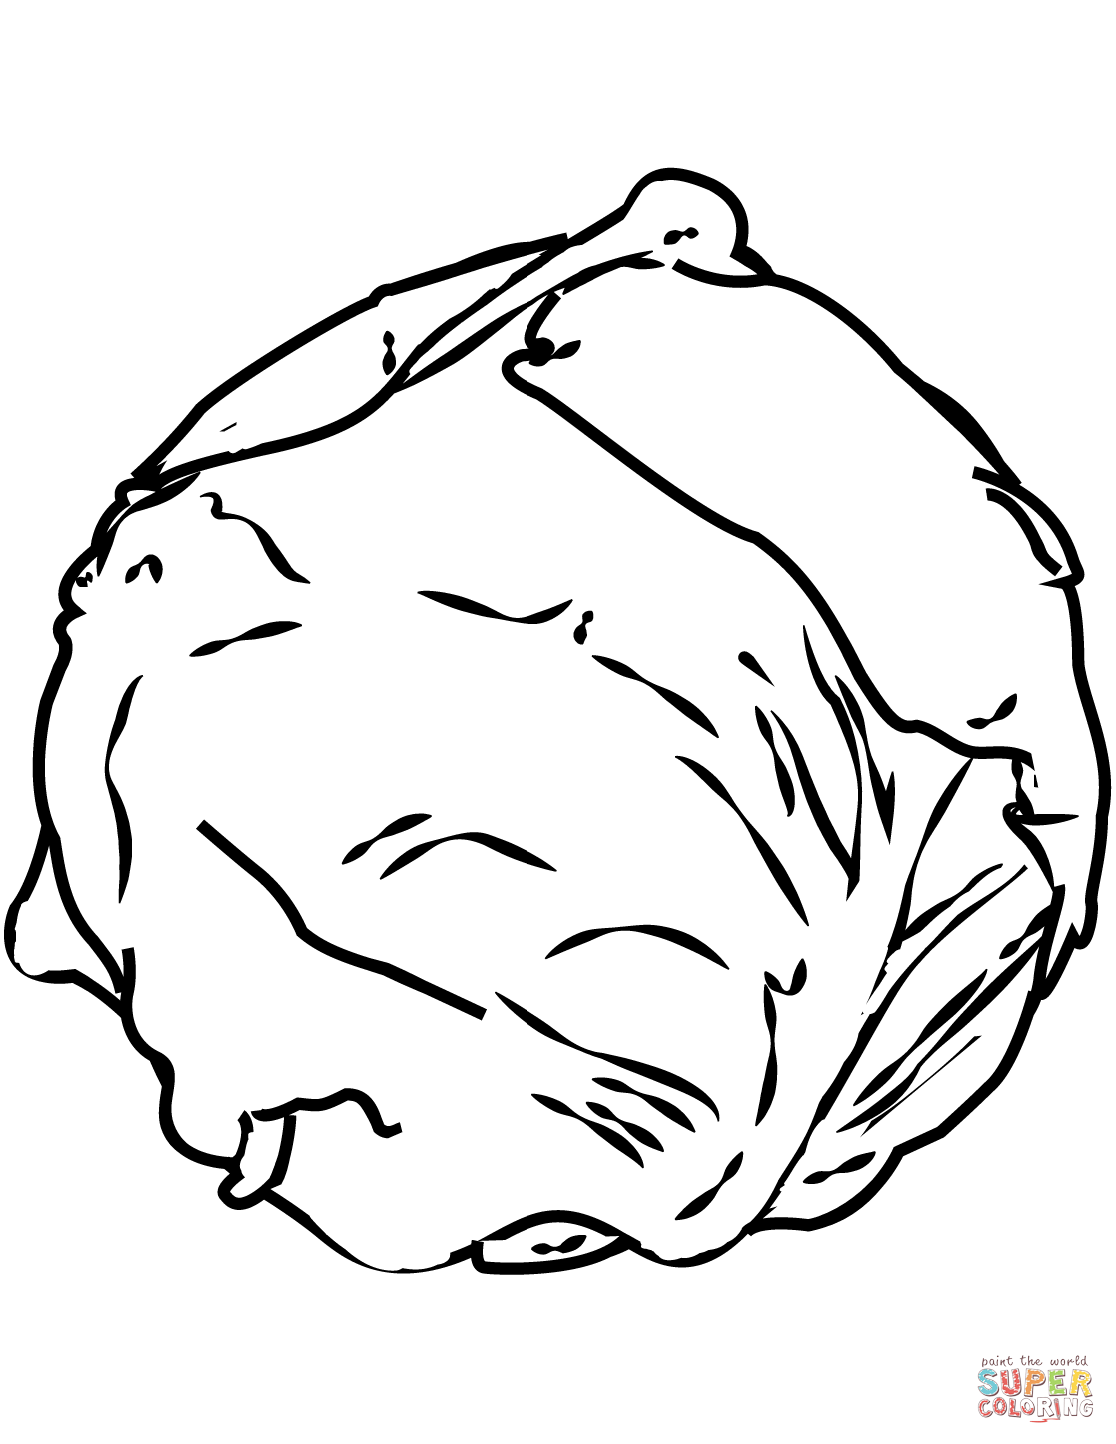 Cabbage coloring page | Free Printable Coloring Pages